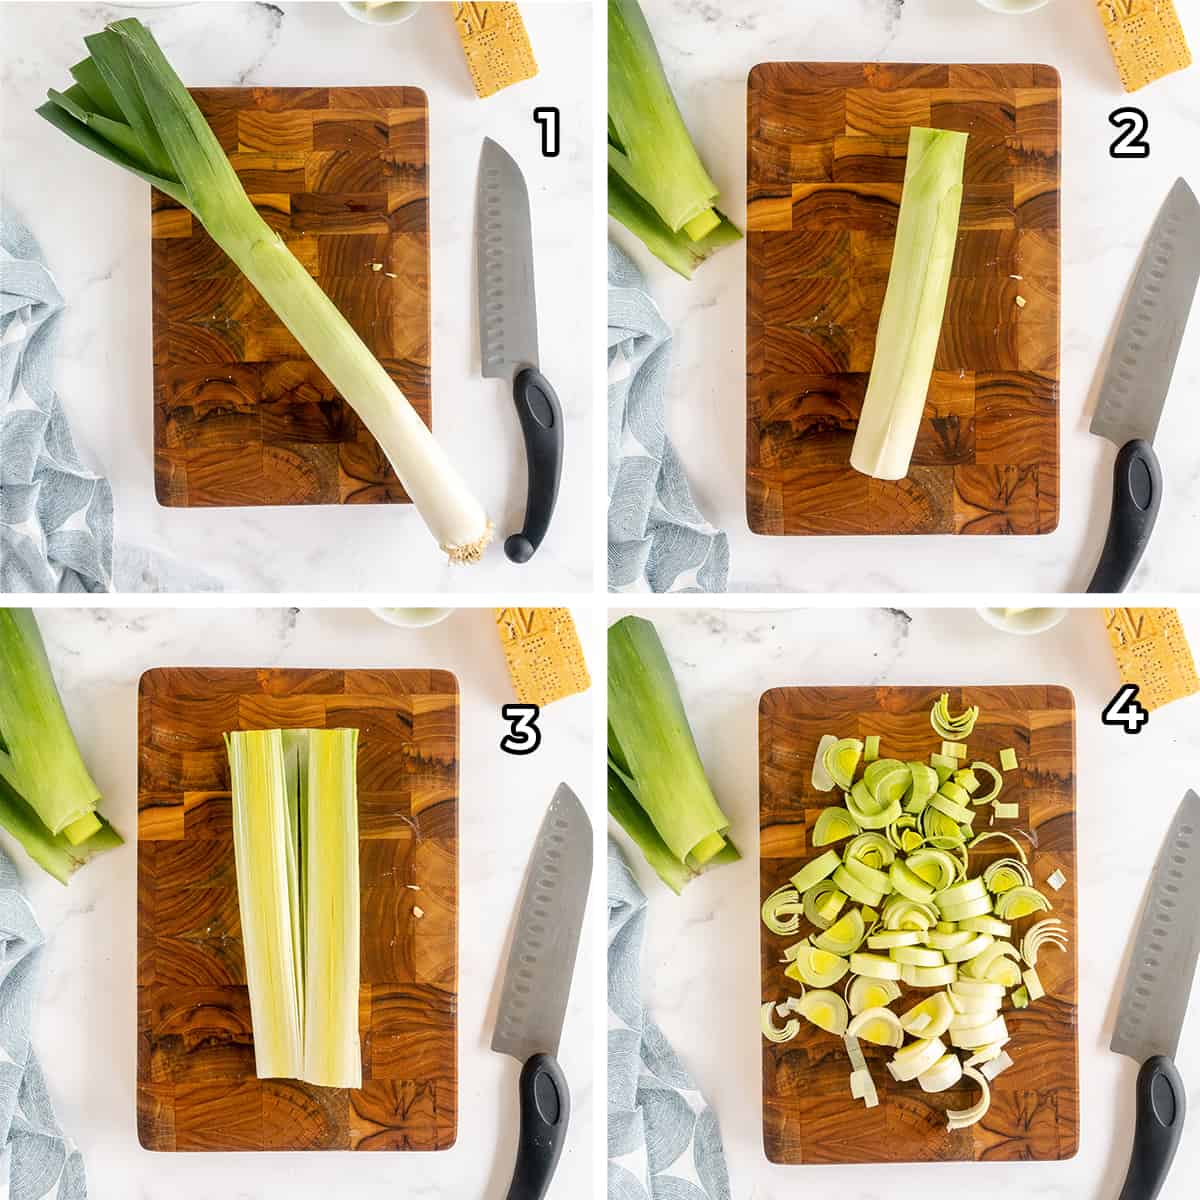 A leek sliced lengthwise and then sliced into pieces.